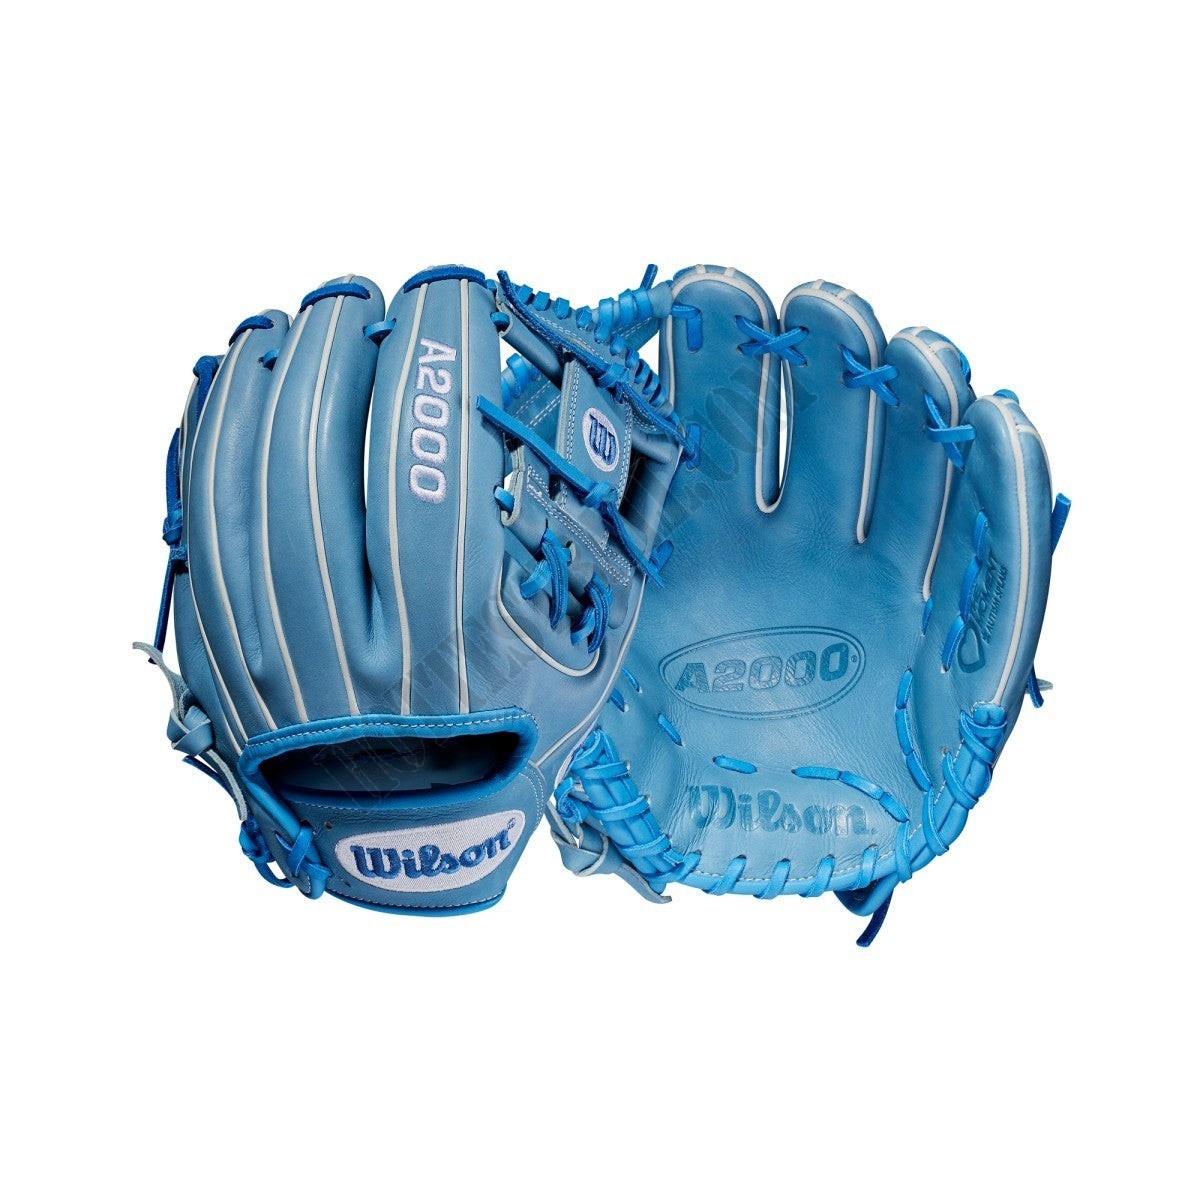 2020 Autism Speaks A2000 1786 11.5" Infield Baseball Glove - Limited Edition ● Wilson Promotions - 2020 Autism Speaks A2000 1786 11.5" Infield Baseball Glove - Limited Edition ● Wilson Promotions